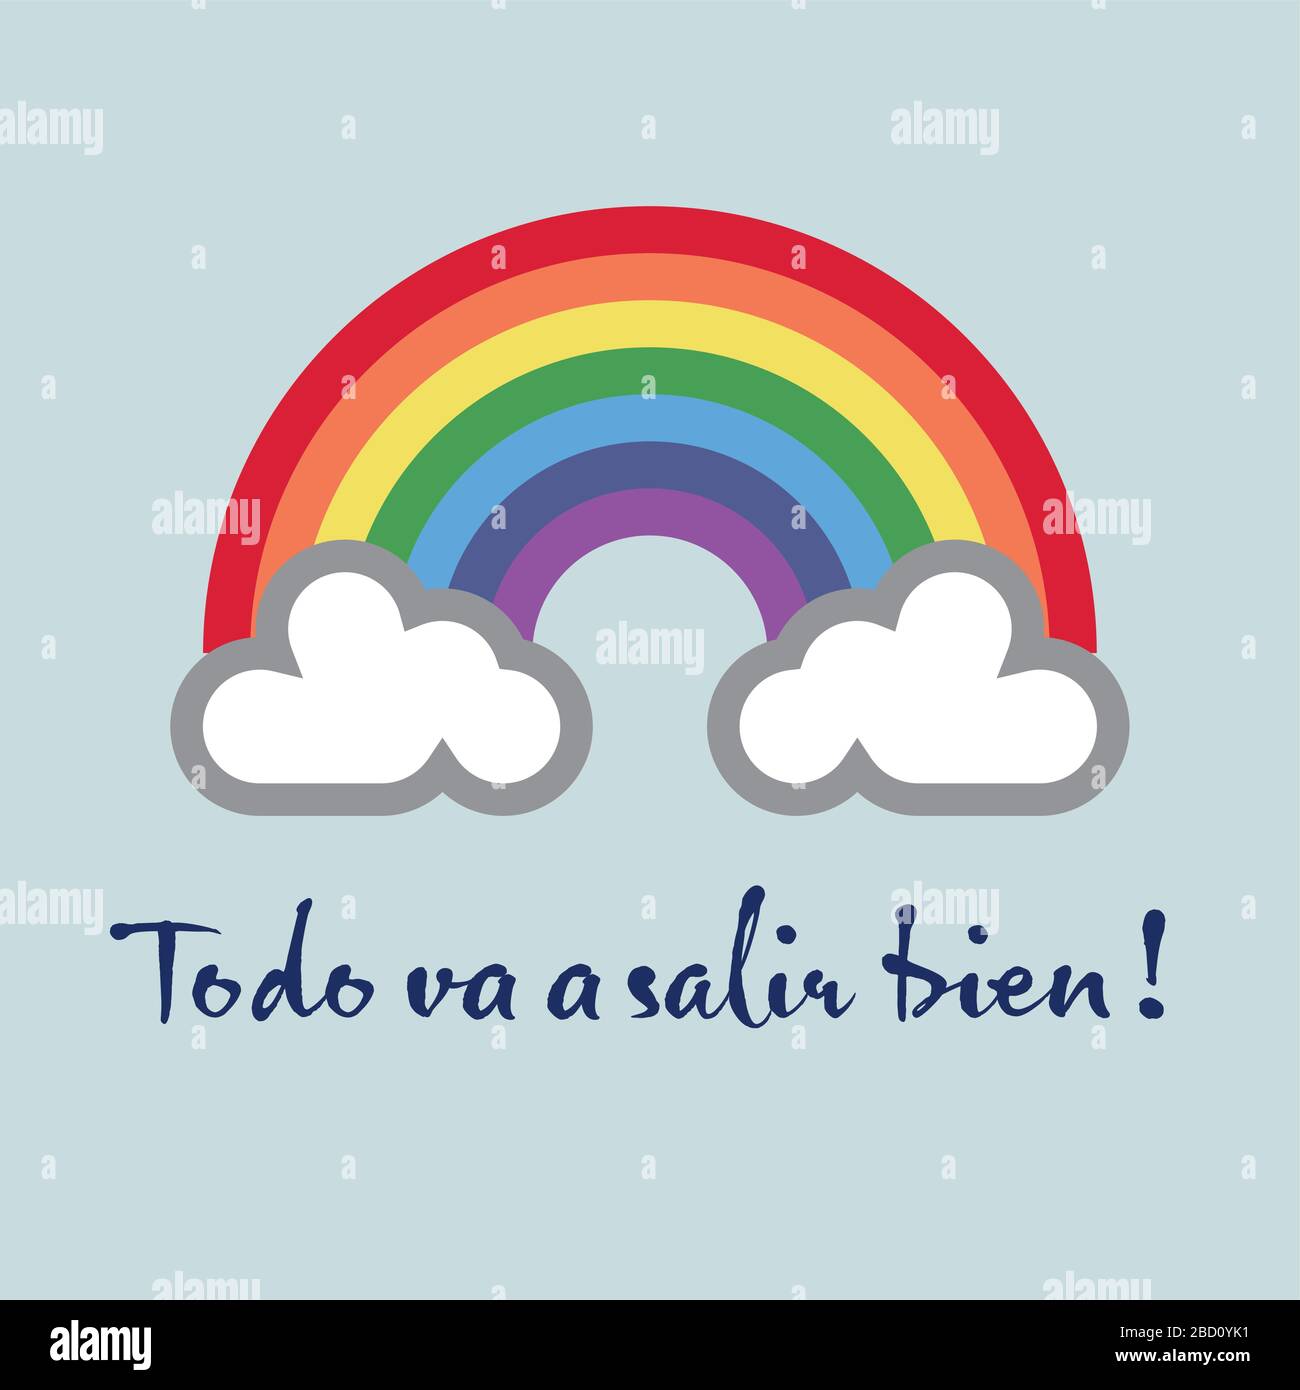 A rainbow for hope and wish: Todo va a salir bien - Everything gonna be alright Stock Vector